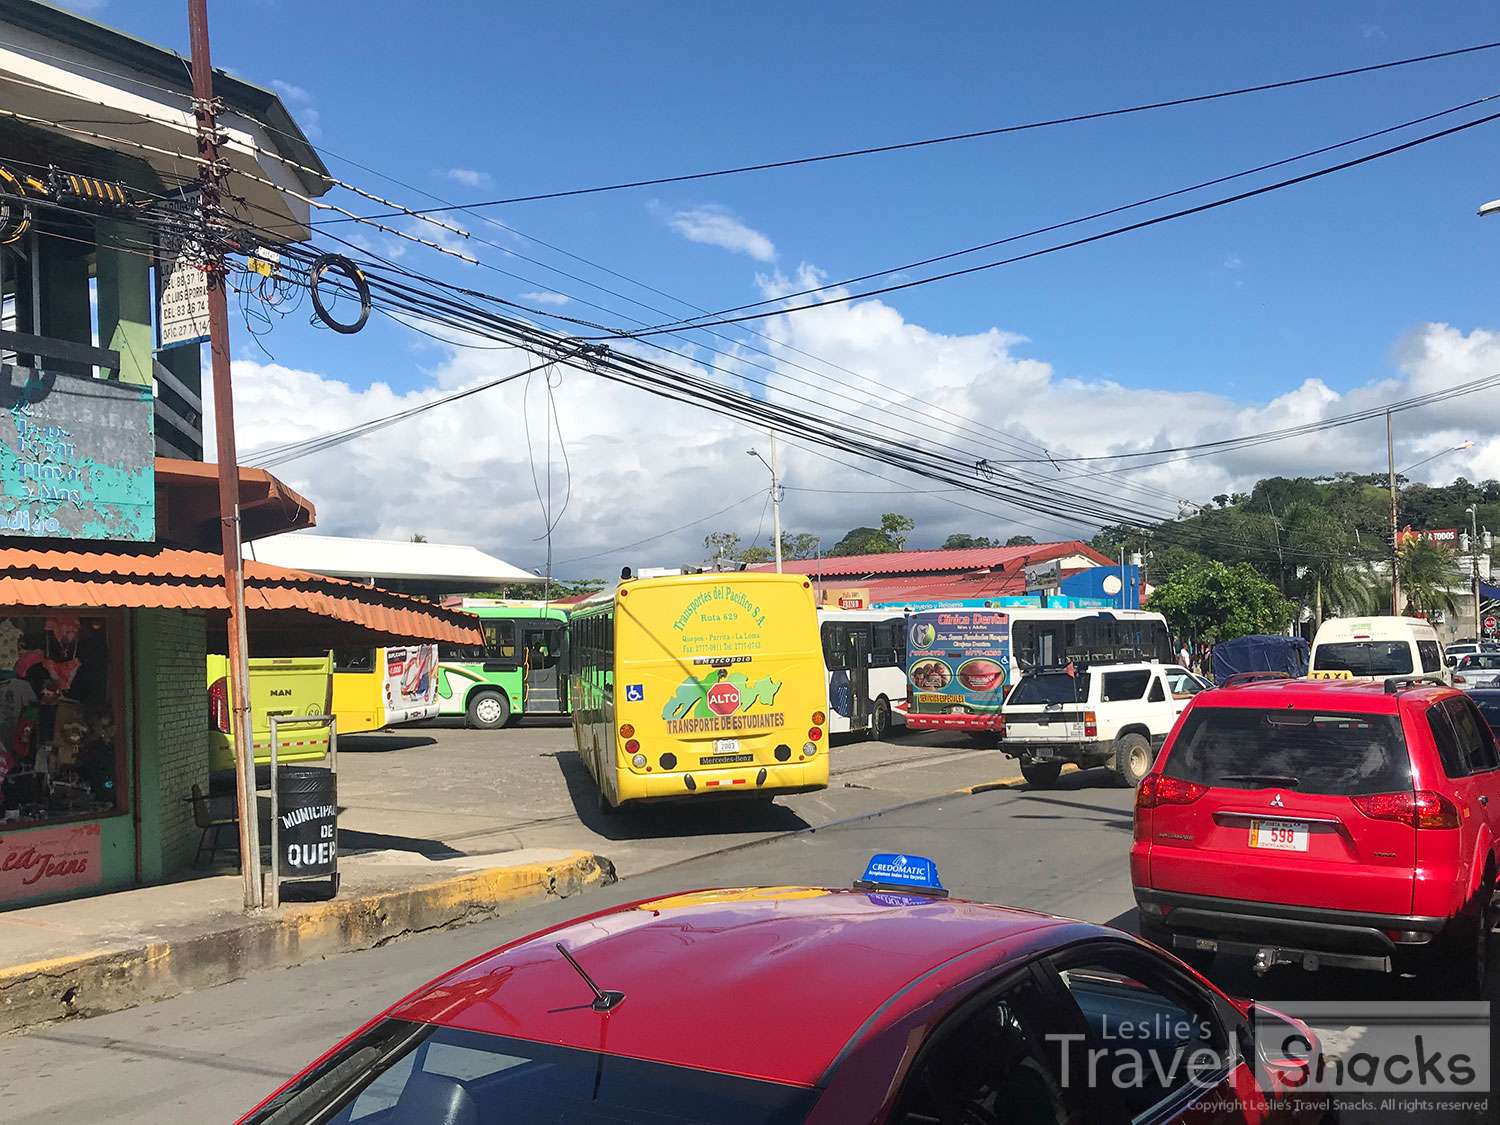 This is the main bus station in Quepos. It's only 1 1/2 blocks from the water. There are restaurants and grocery stores all nearby.